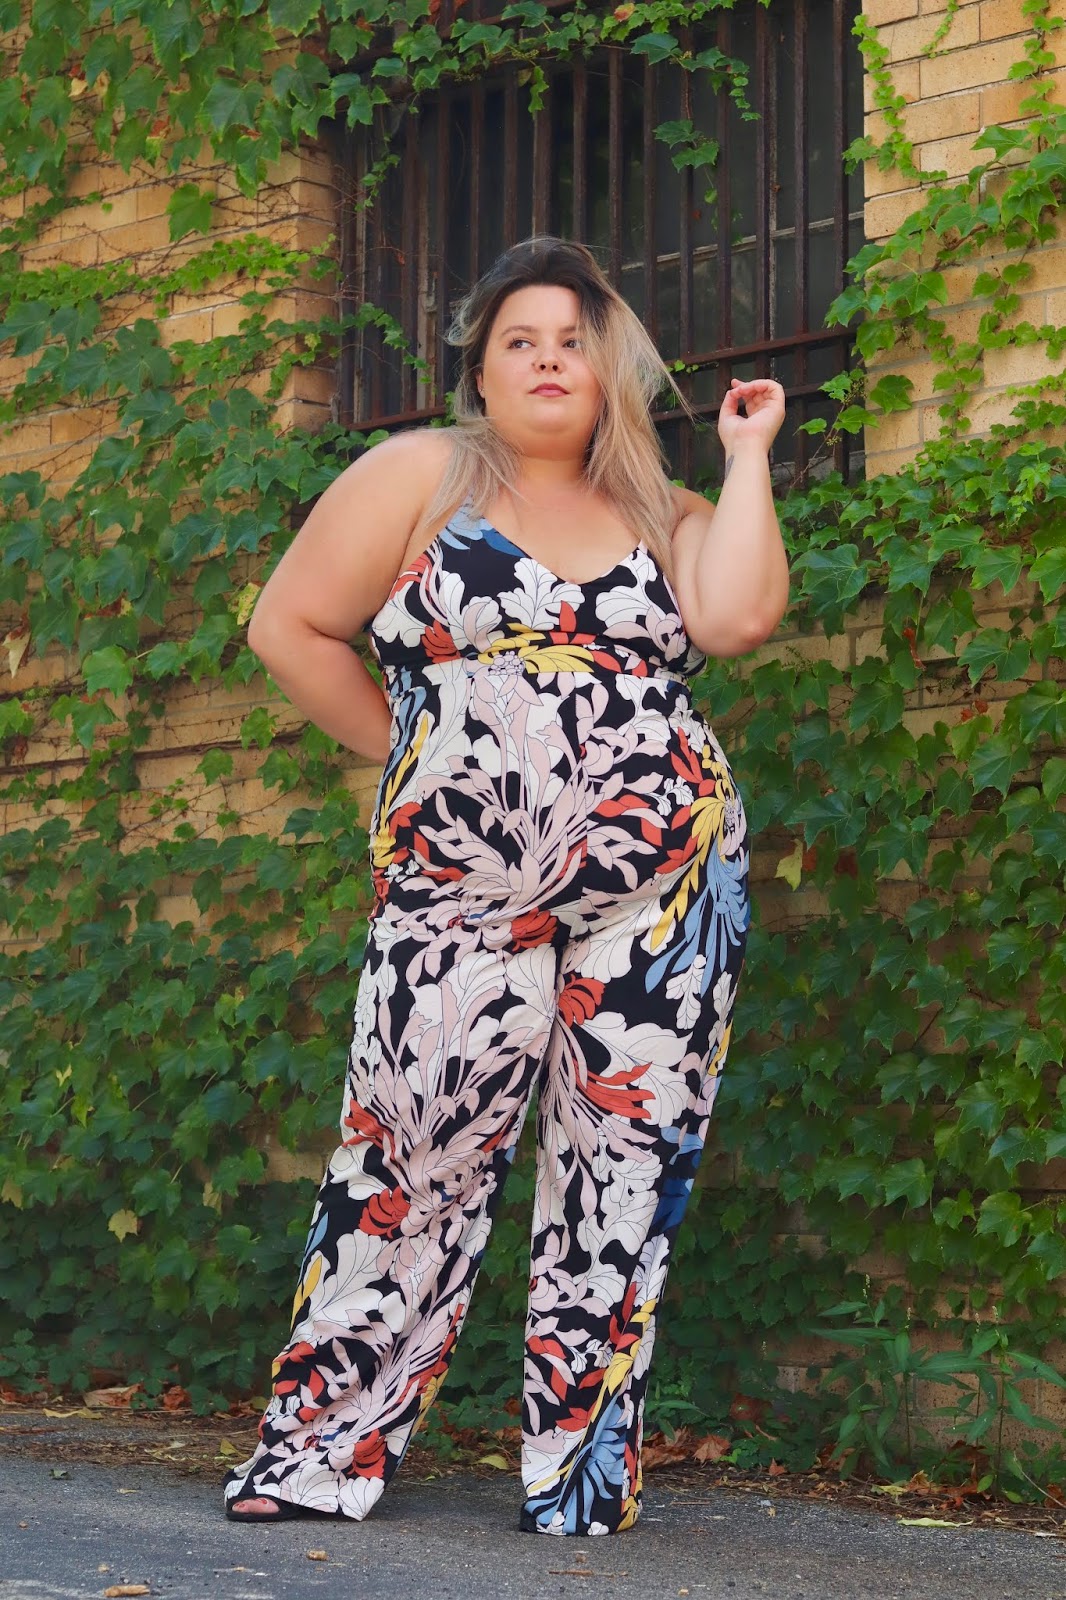 Chicago Plus Size Petite Fashion Blogger, influencer, YouTuber, and model Natalie Craig, of Natalie in the City, review's Fashion Nova's floral jumpsuits.